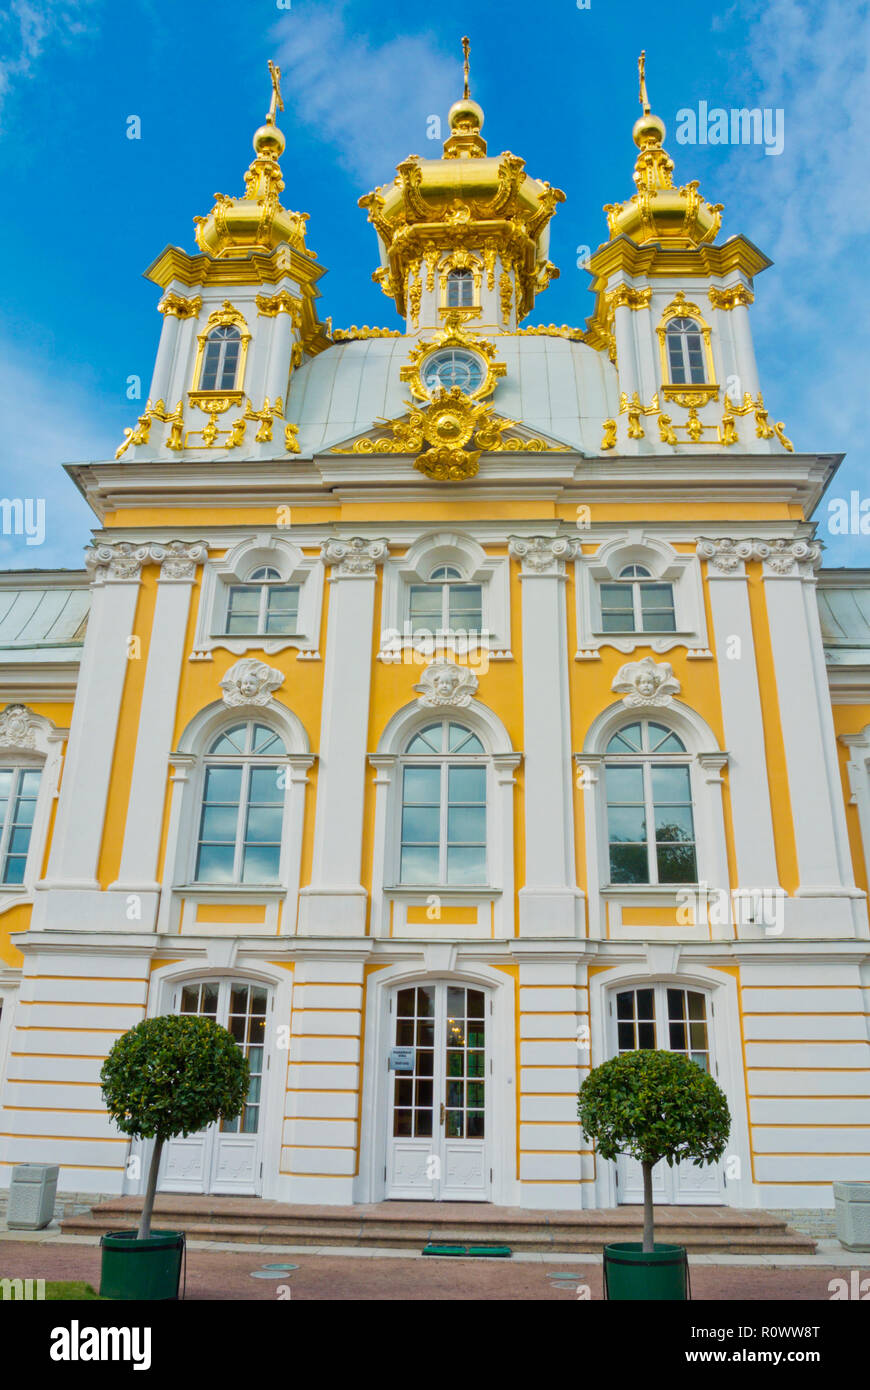 Palace Cathedral of Saints Peter and Paul, Peterhof, near Saint Petersburg, Russia Stock Photo